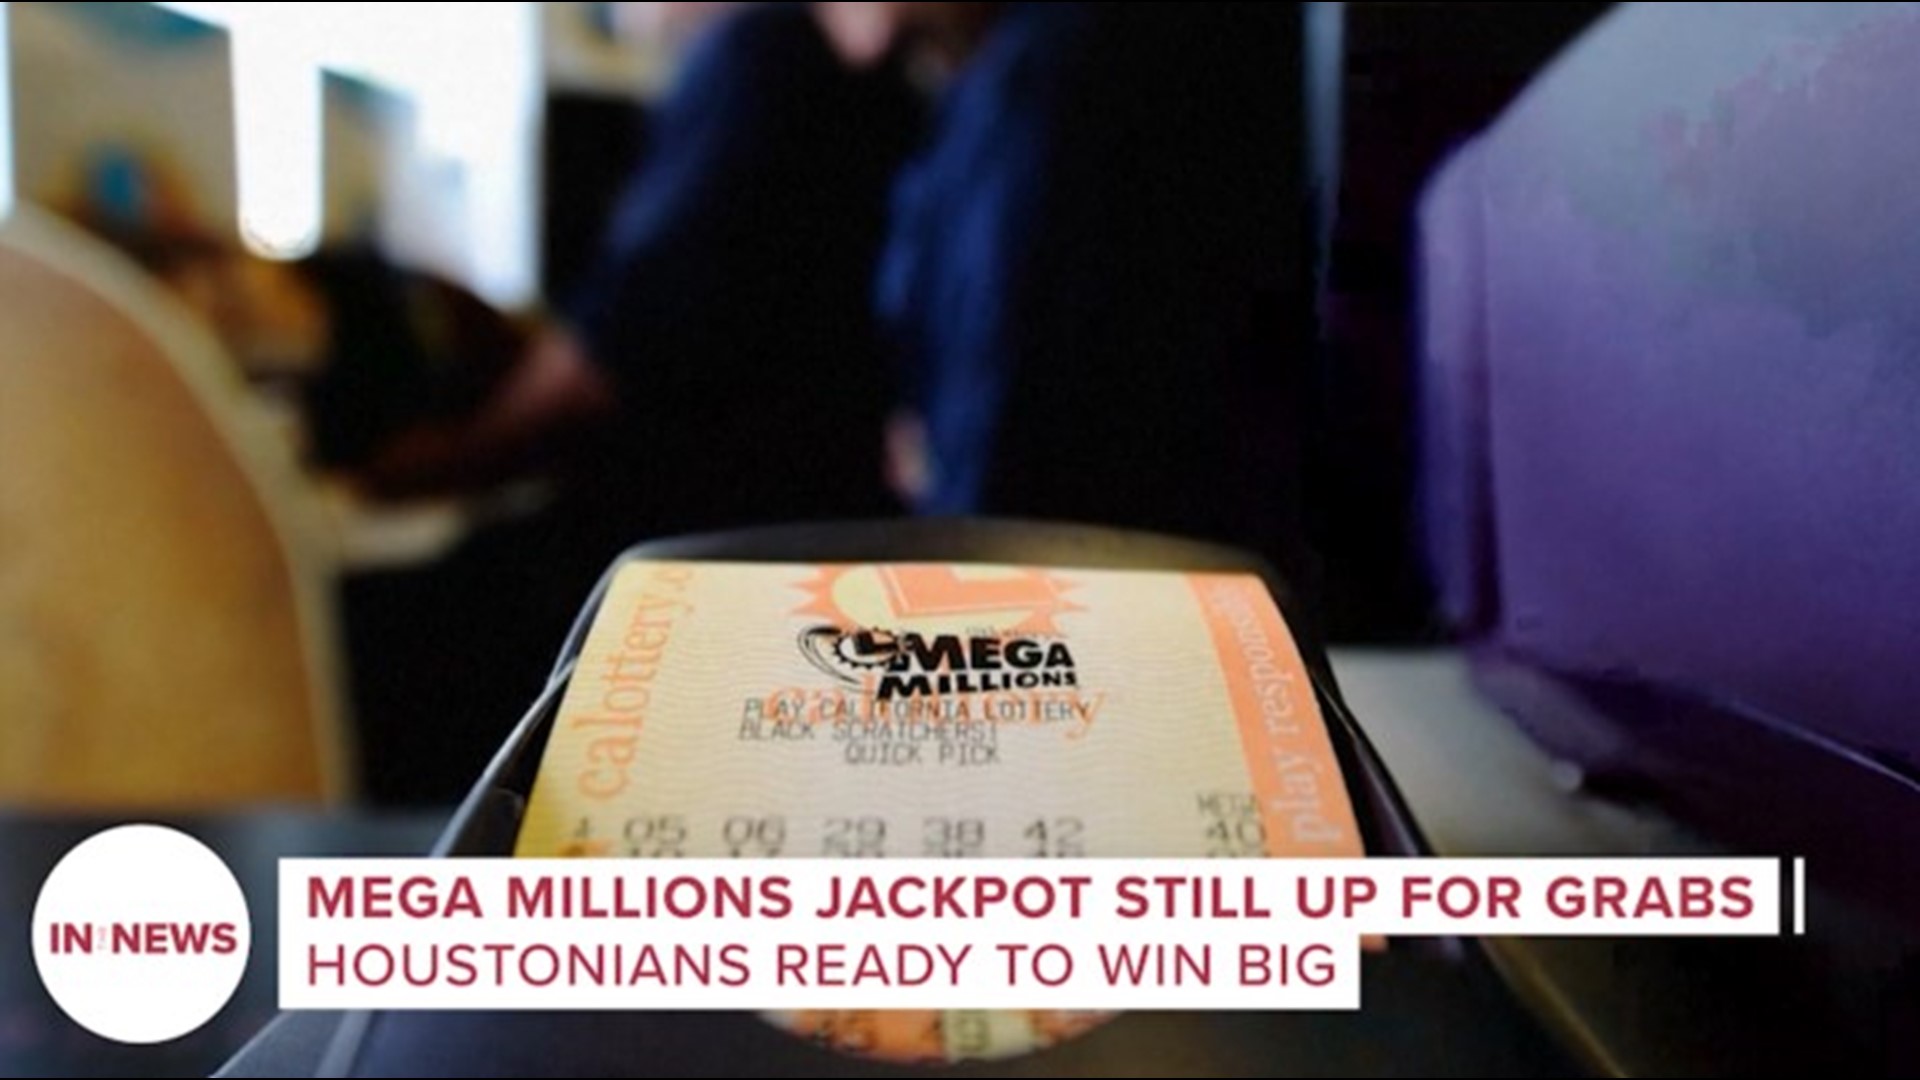 As the Mega Millions jackpot goes over $1B, people all over the U.S. are buying tickets in the hopes of winning big. Hear from residents around the country.